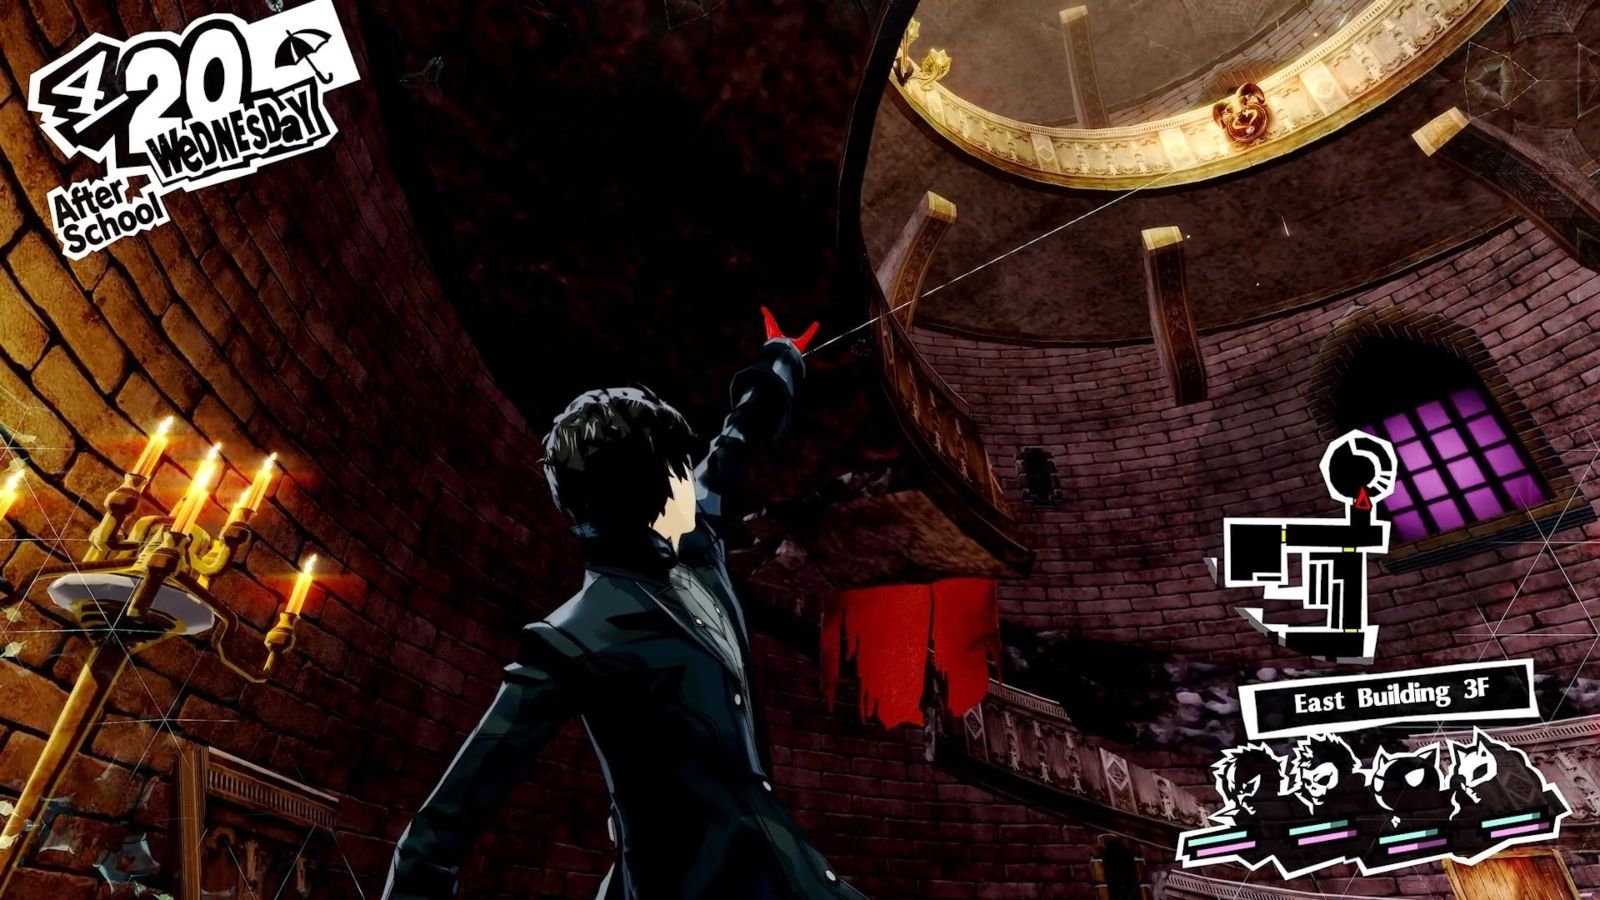 Persona 5 Royal Nintendo Switch review - The portable thieves of